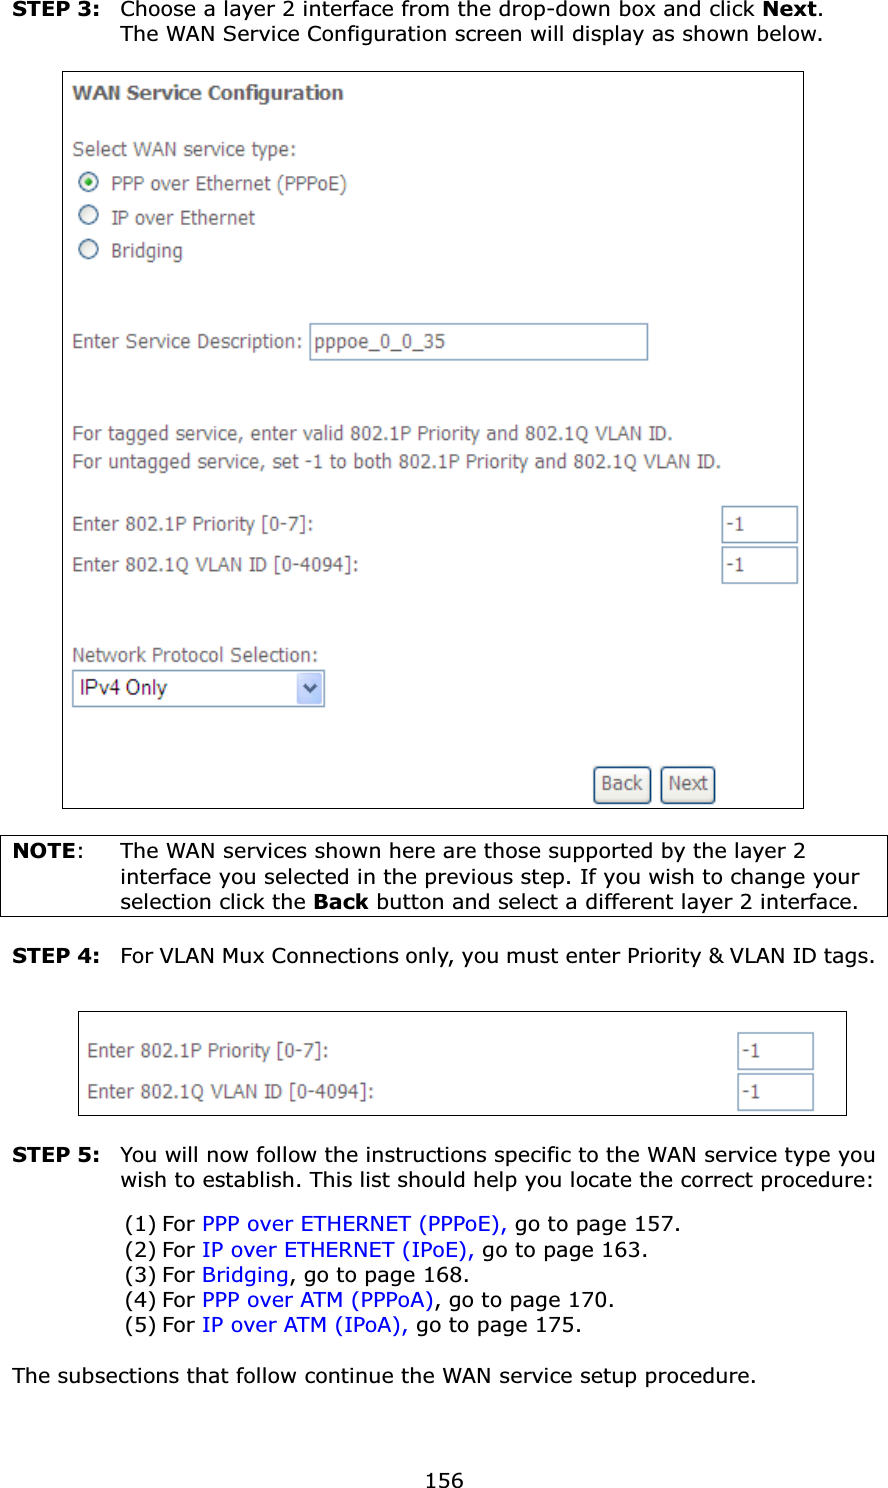  156STEP 3:  Choose a layer 2 interface from the drop-down box and click Next.  The WAN Service Configuration screen will display as shown below.     NOTE:  The WAN services shown here are those supported by the layer 2 interface you selected in the previous step. If you wish to change your selection click the Back button and select a different layer 2 interface.  STEP 4:  For VLAN Mux Connections only, you must enter Priority &amp; VLAN ID tags.    STEP 5:  You will now follow the instructions specific to the WAN service type you wish to establish. This list should help you locate the correct procedure: (1) For PPP over ETHERNET (PPPoE), go to page 157. (2) For IP over ETHERNET (IPoE), go to page 163. (3) For Bridging, go to page 168. (4) For PPP over ATM (PPPoA), go to page 170. (5) For IP over ATM (IPoA), go to page 175.   The subsections that follow continue the WAN service setup procedure.     